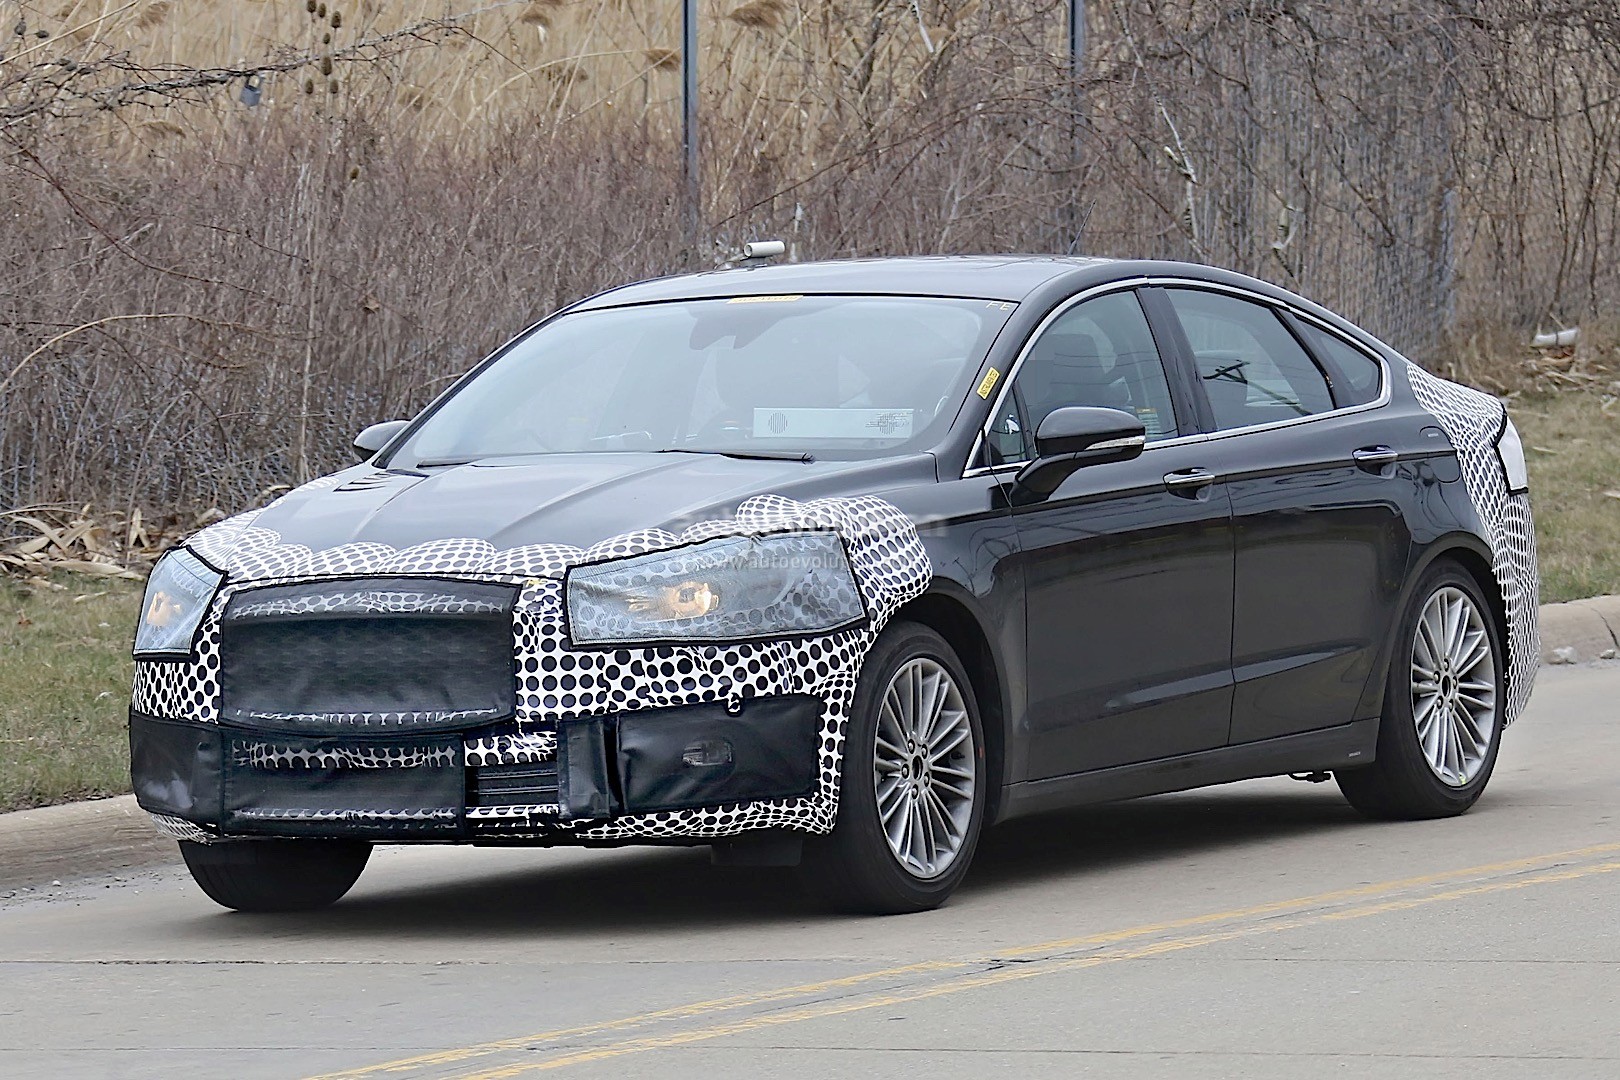 2017 Ford Fusion (Mondeo Facelift) Spied - autoevolution